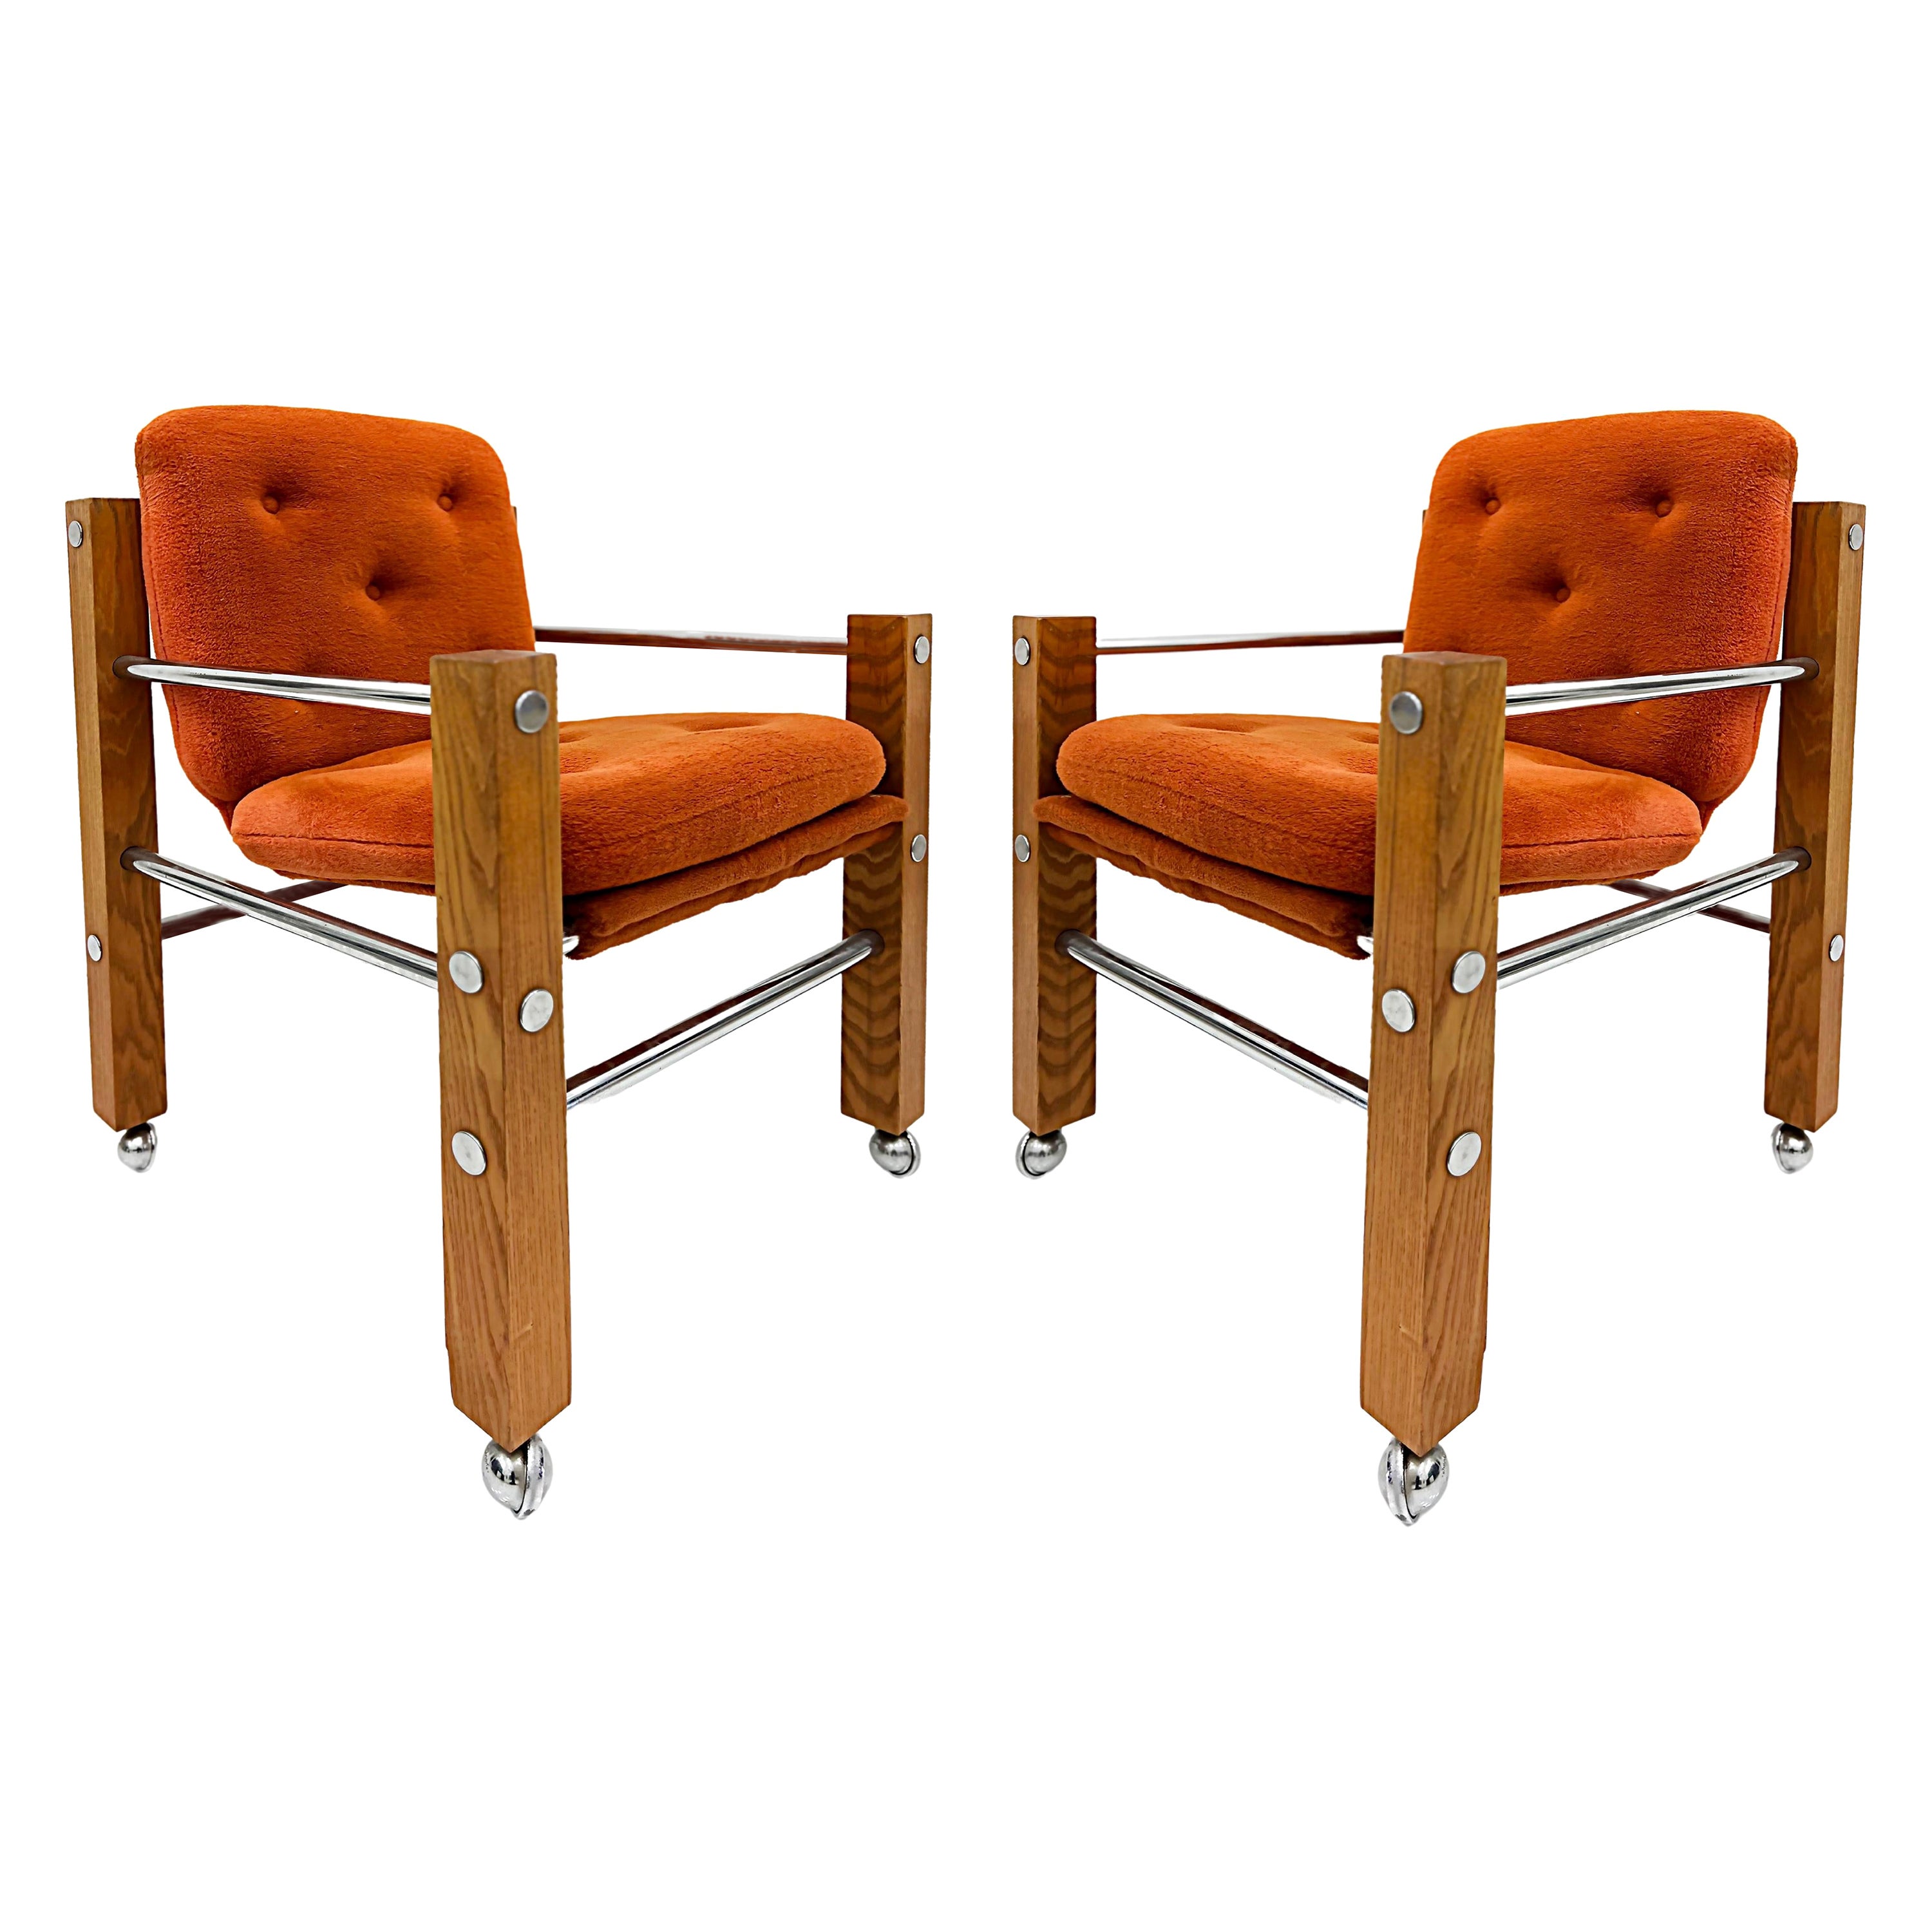 1970s Vintage Architectural Form Armchairs on Casters, Pair